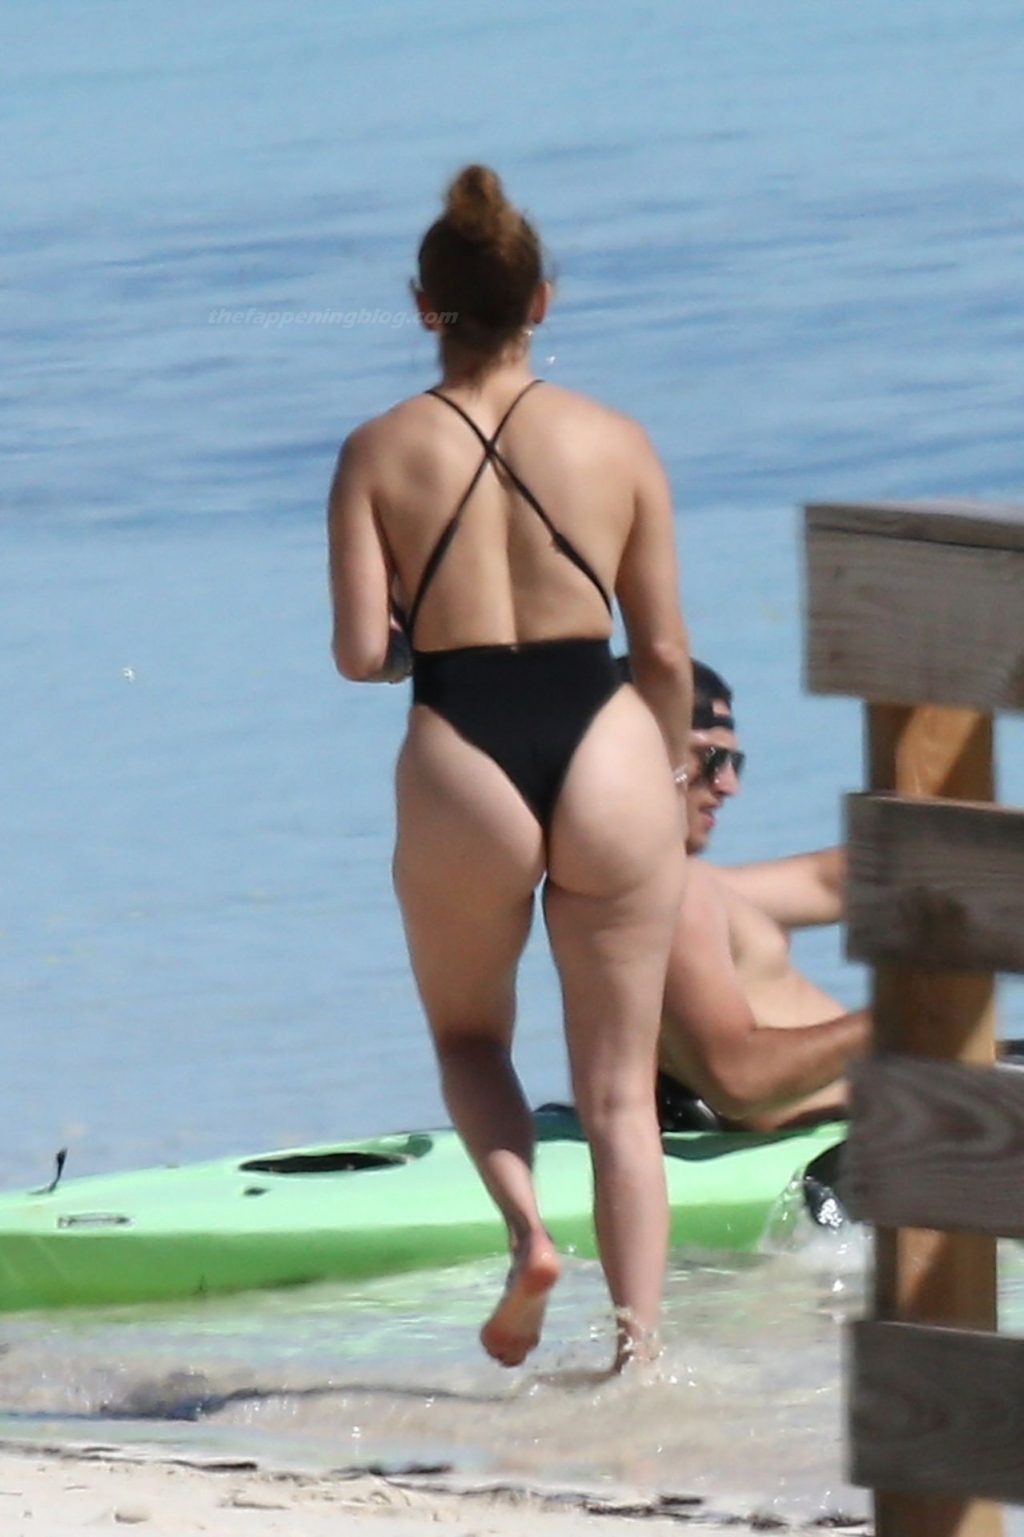 Jennifer Lopez Goes Paddle-boarding in Turks and Caicos Islands (49 Photos)